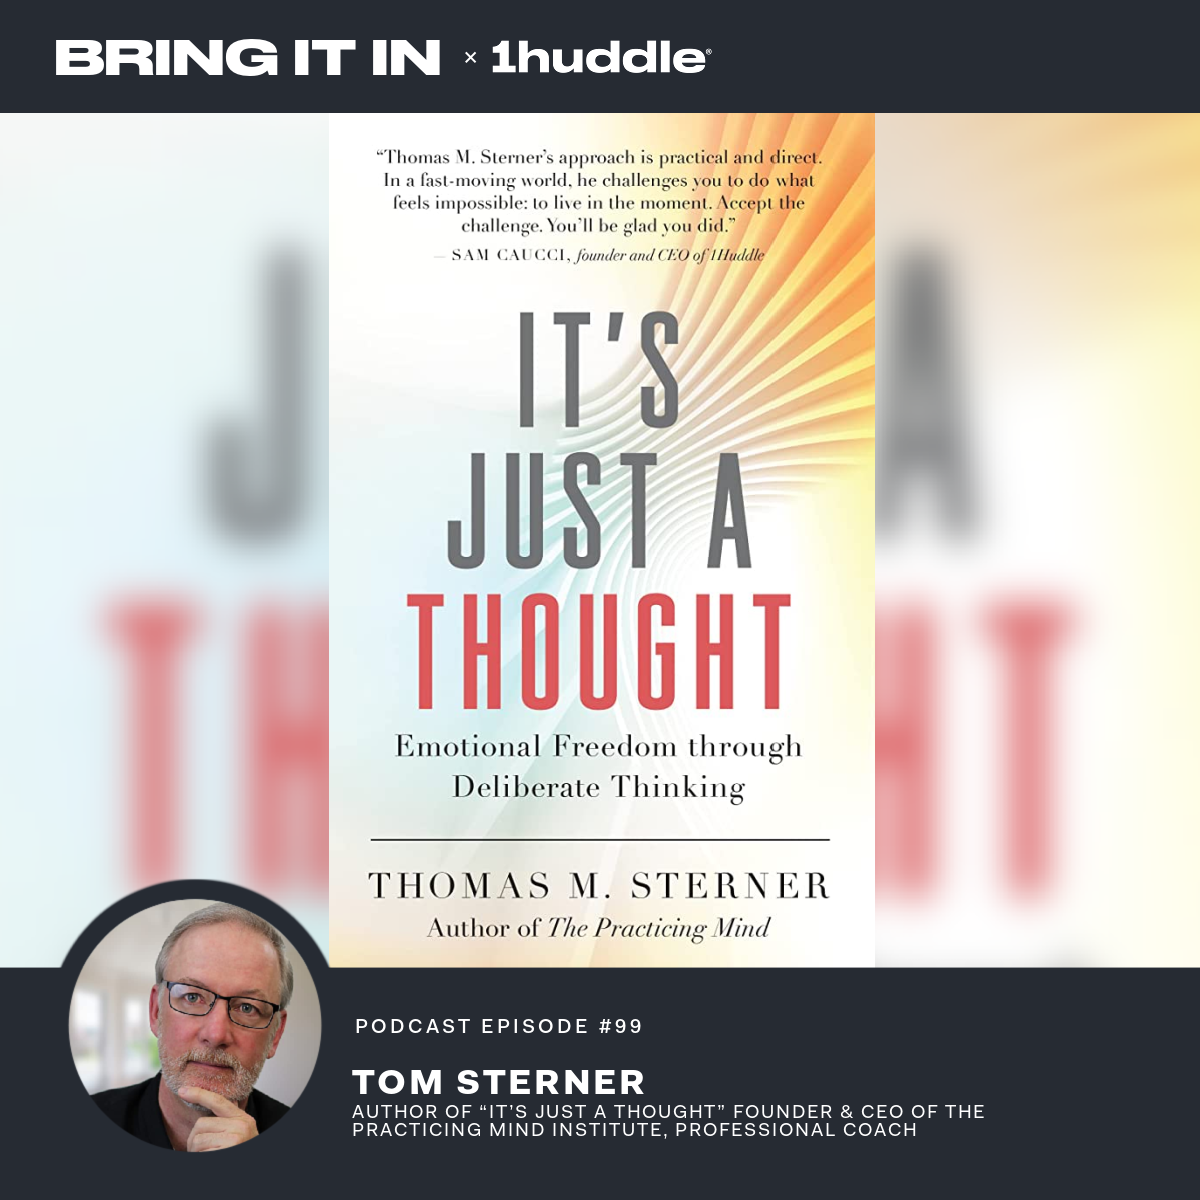 Tom Sterner, Author of “It’s Just a Thought: Emotional Freedom Through Deliberate Thinking,” Founder & CEO of the Practicing Mind Institute, Professional Coach